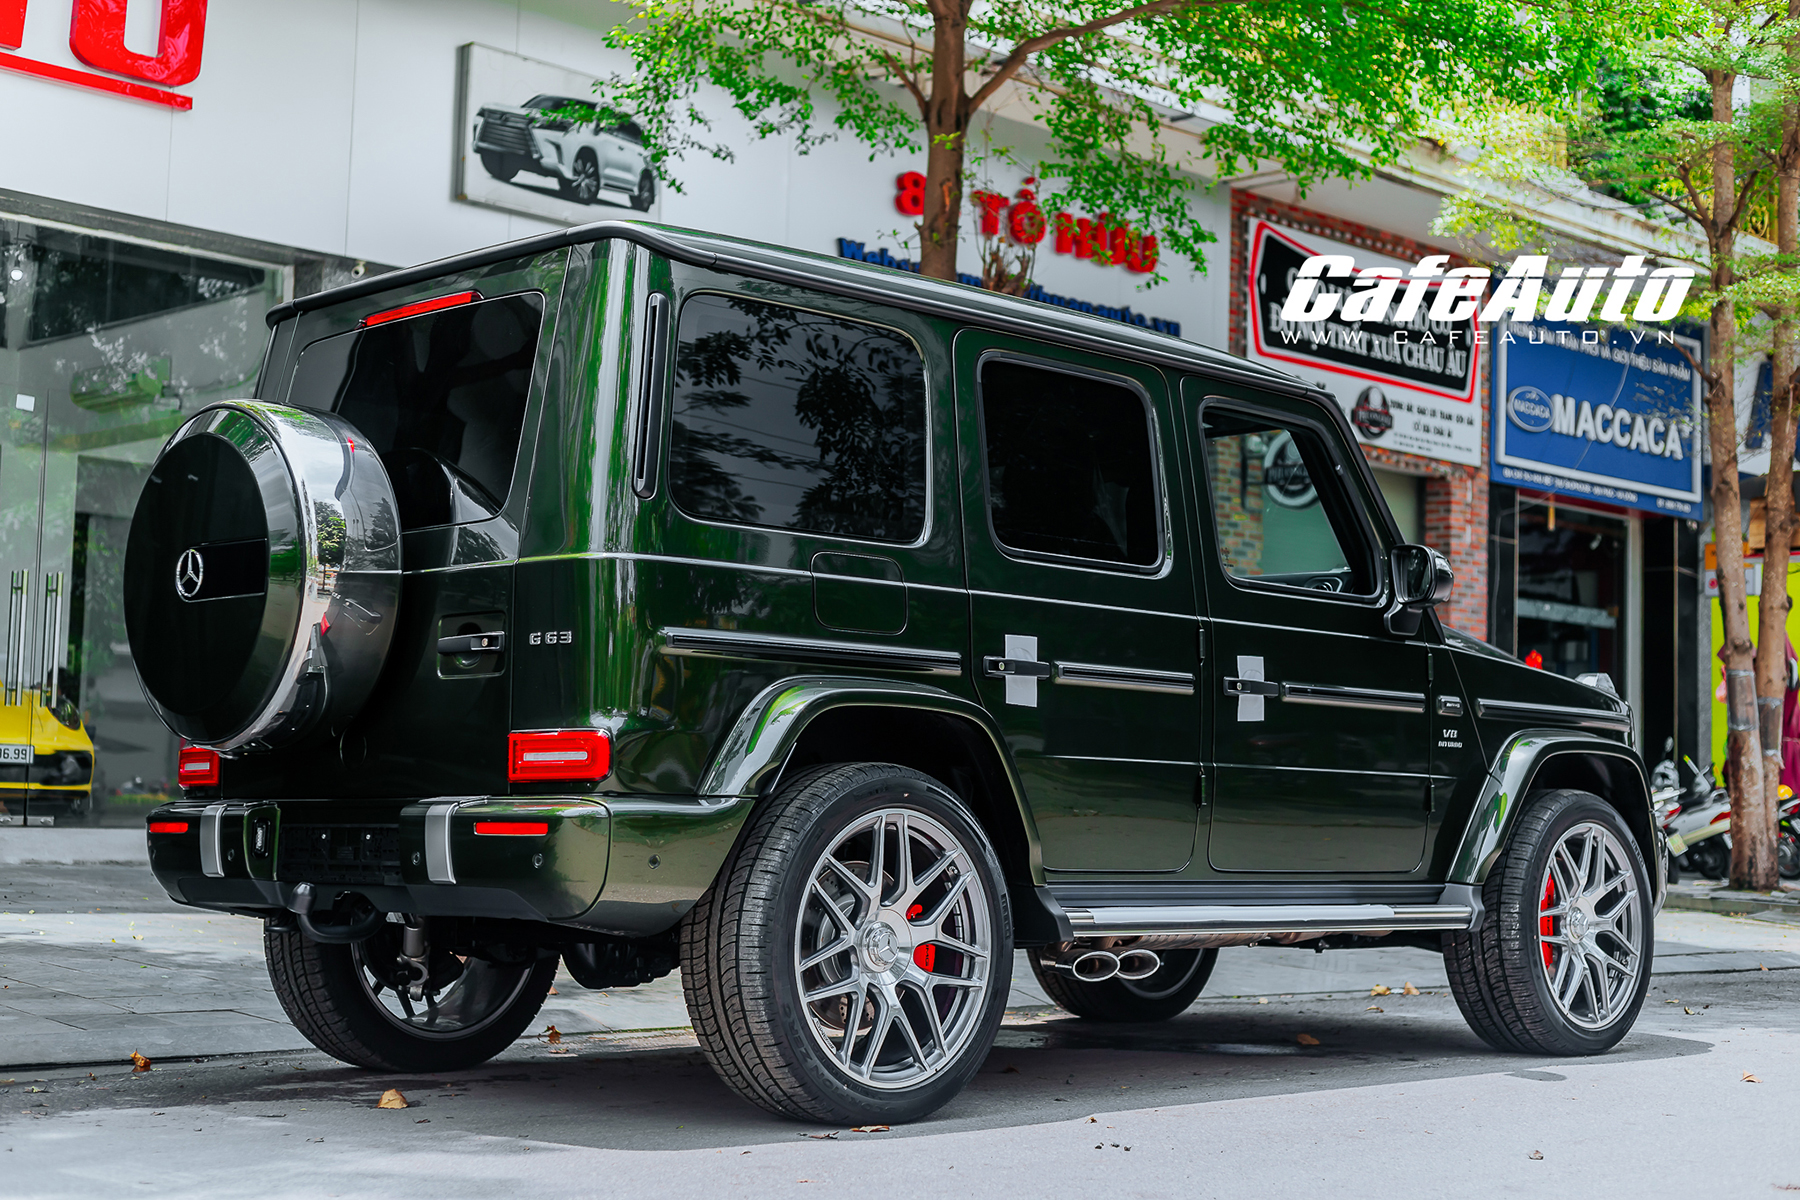 mercedes-amg-g-63-phan-phoi-chinh-hang-cafeautovn-14